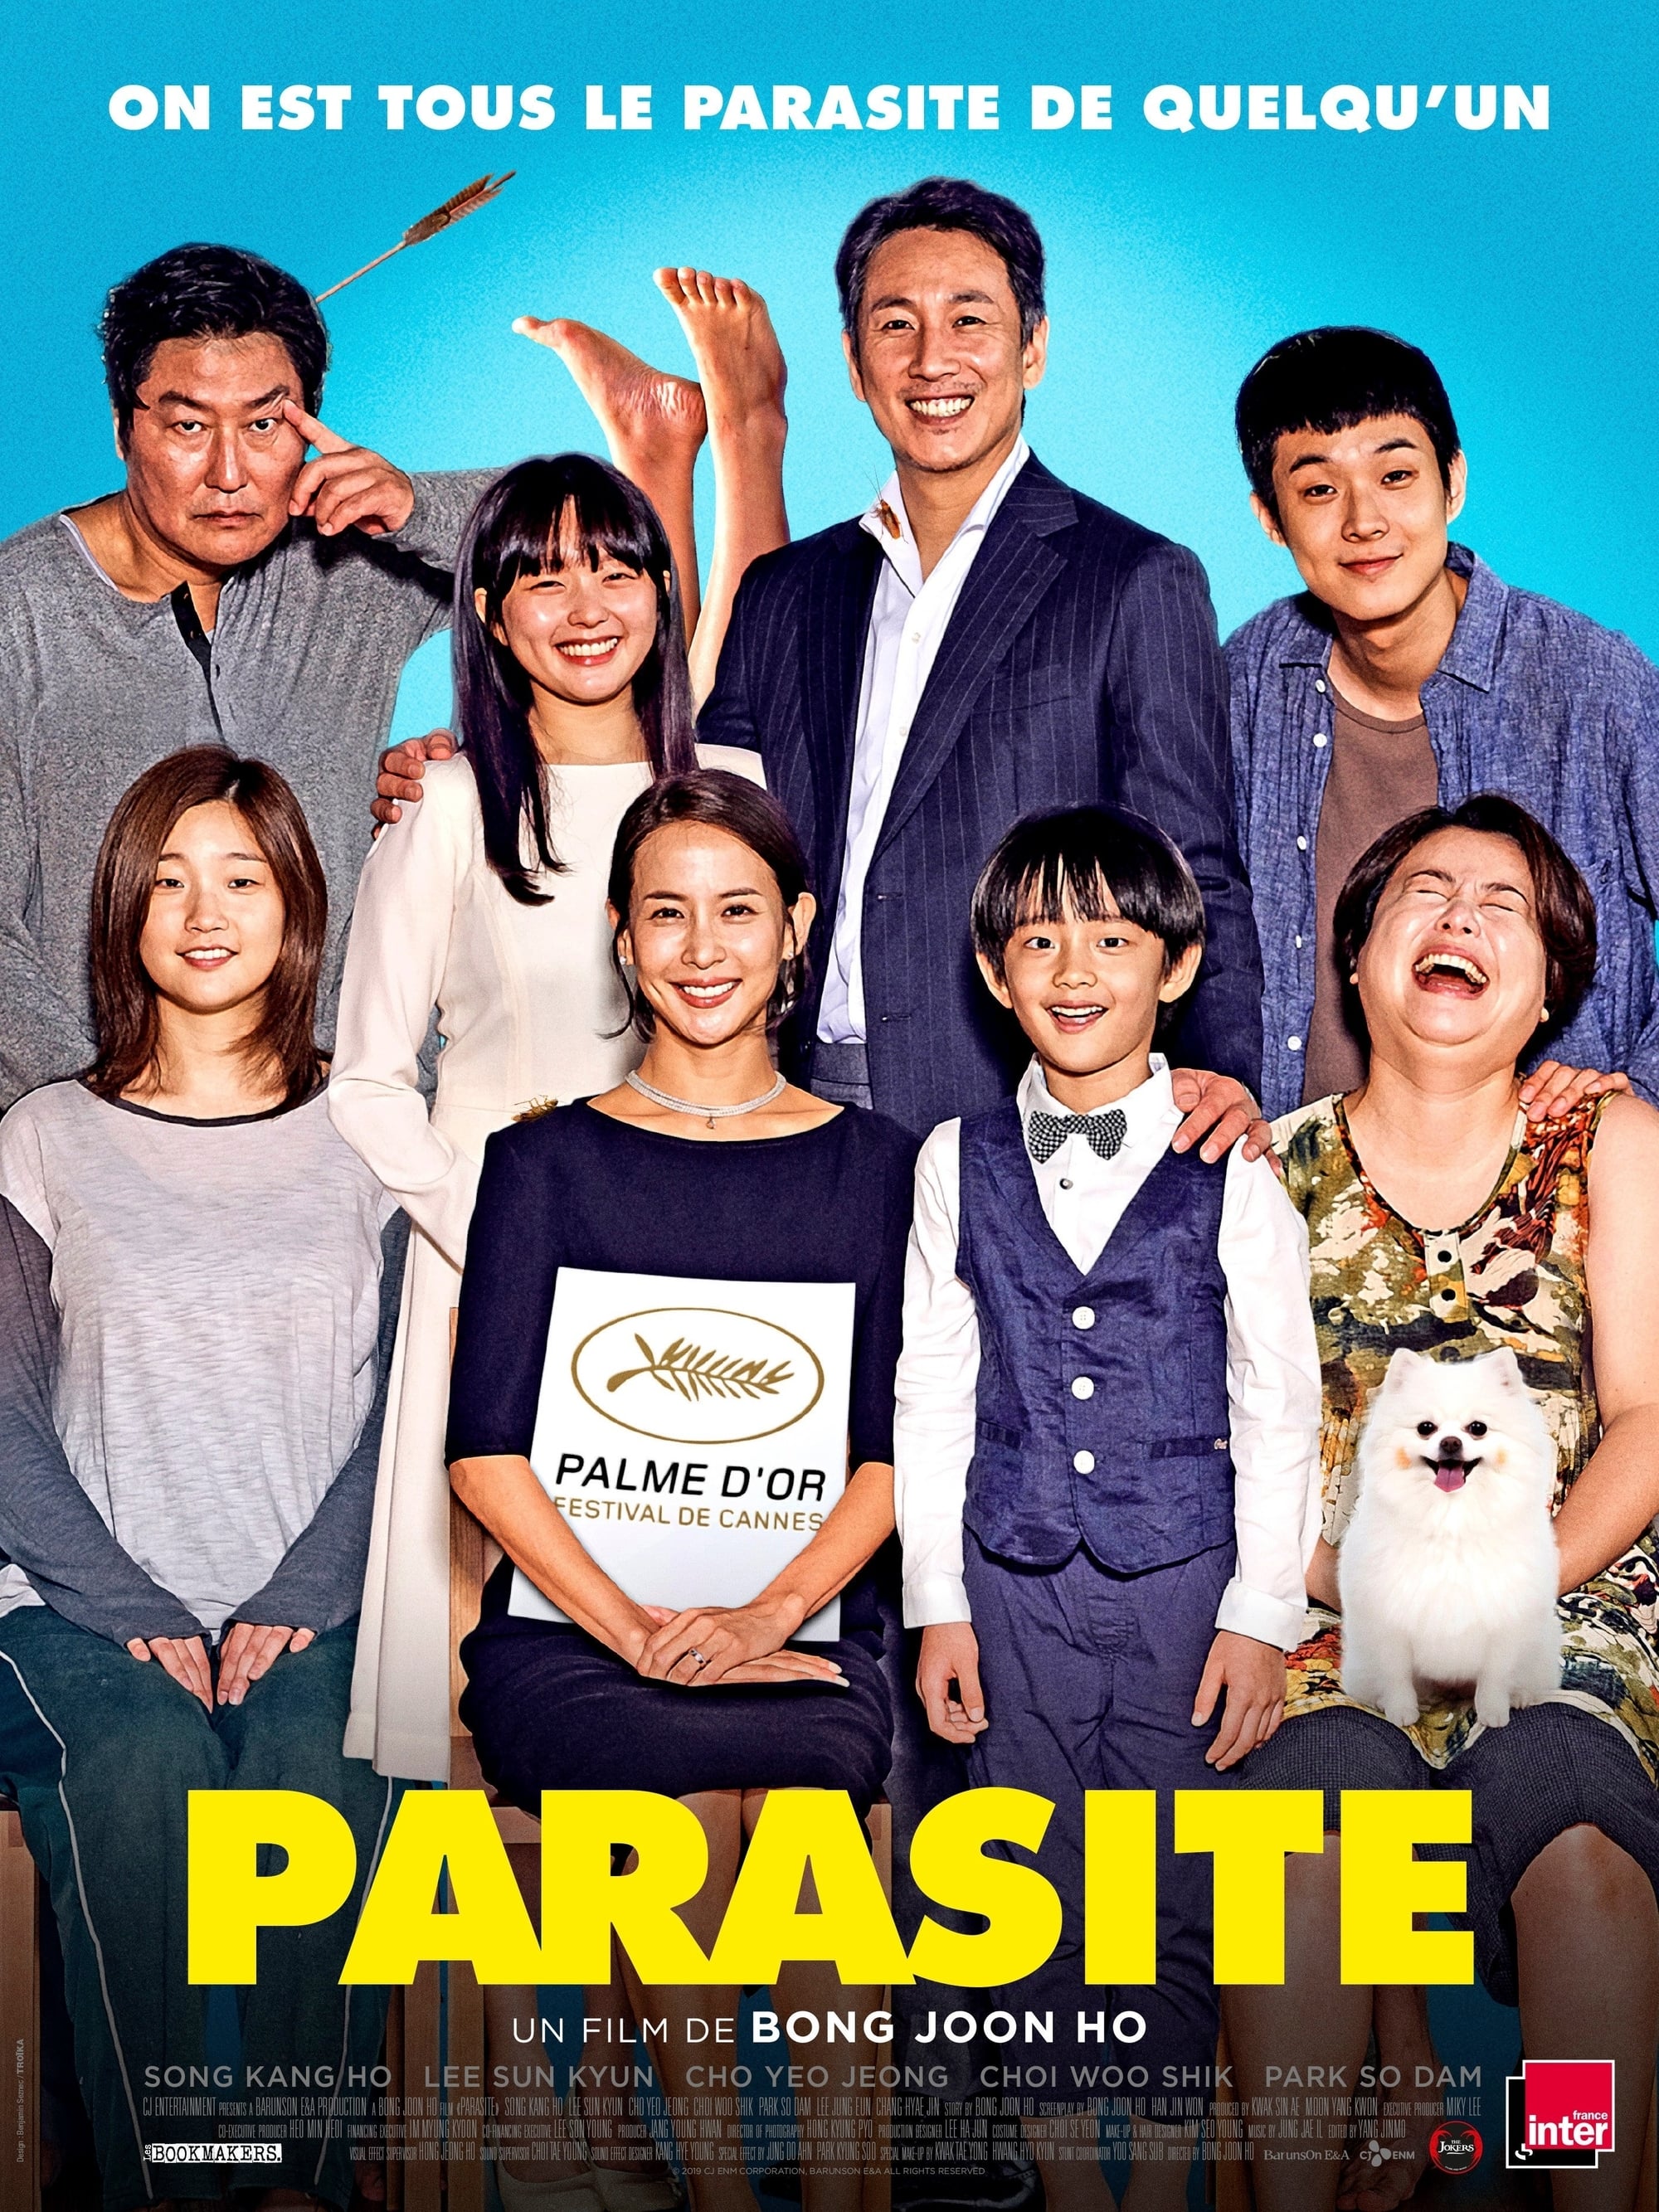 Watch Parasite (2019) Full Movie Online Free - Watch Movies Online HD Quality